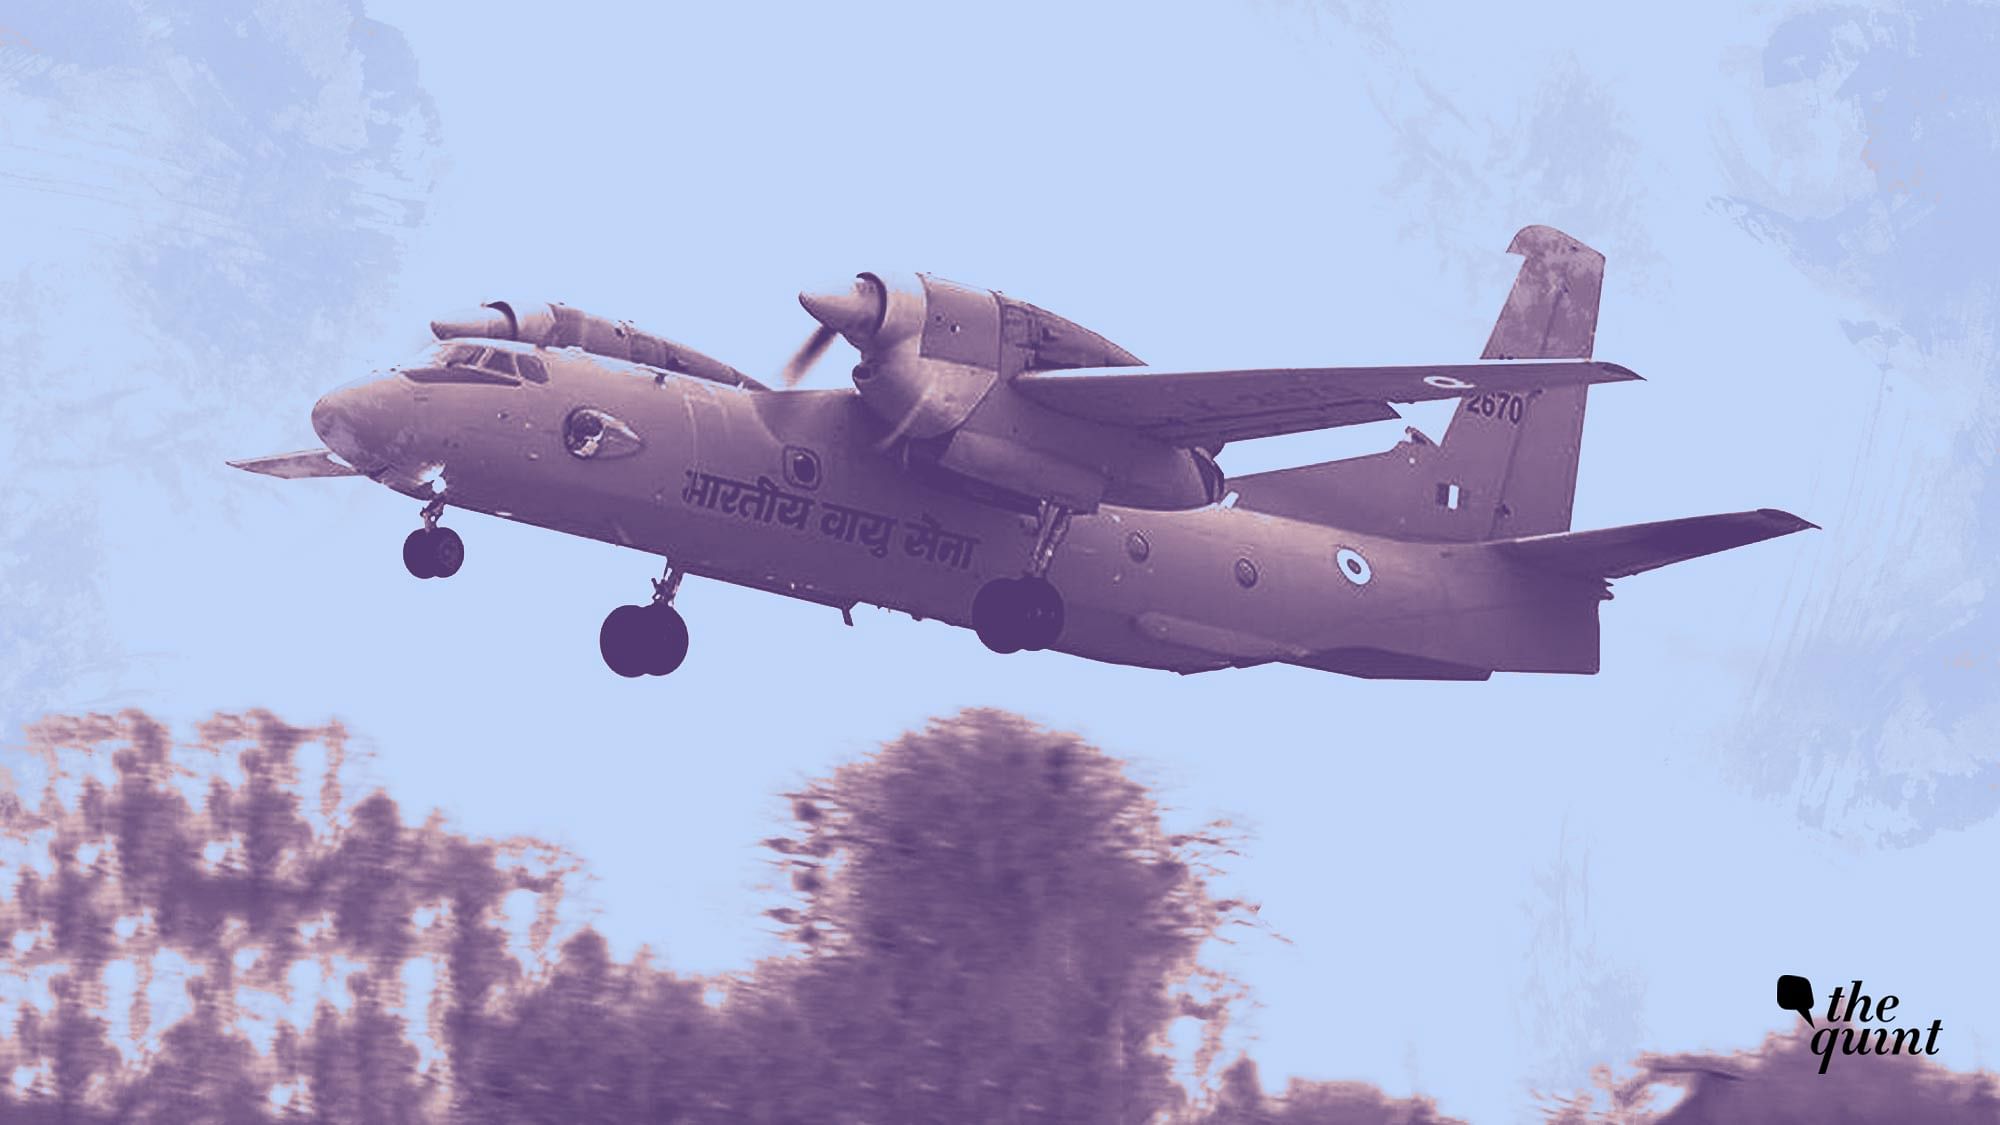 The wreckage of the AN-32 transport aircraft missing since 3 June was located by the IAF on 11 June.